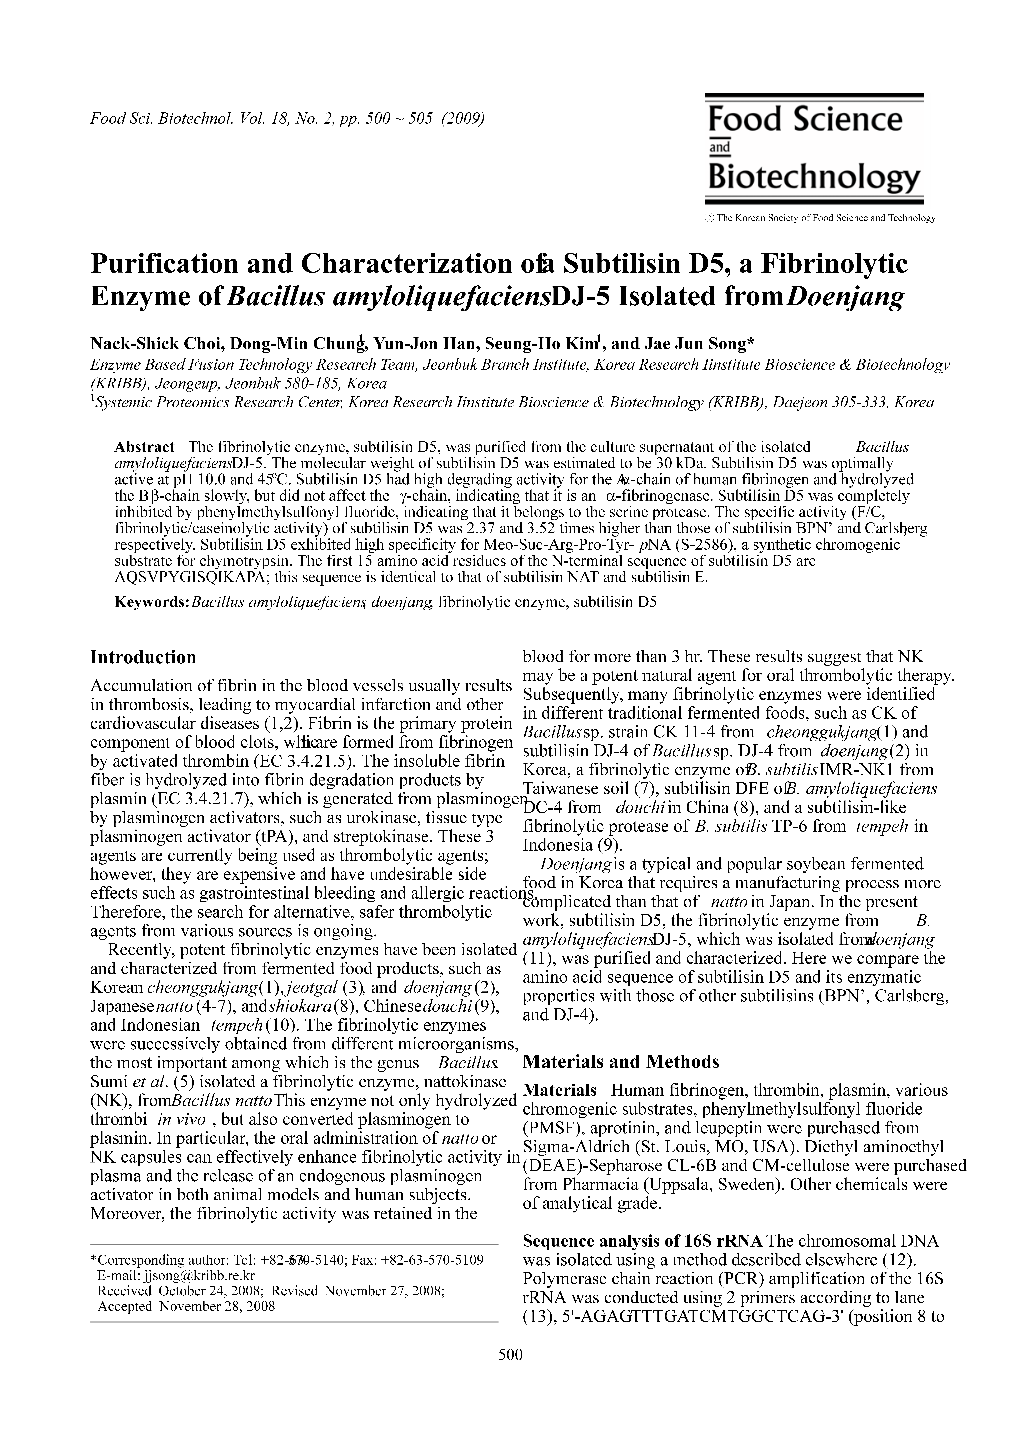 Purification and Characterization of a Subtilisin D5, a Fibrinolytic Enzyme of Bacillus Amyloliquefaciens DJ-5 Isolated from Doenjang